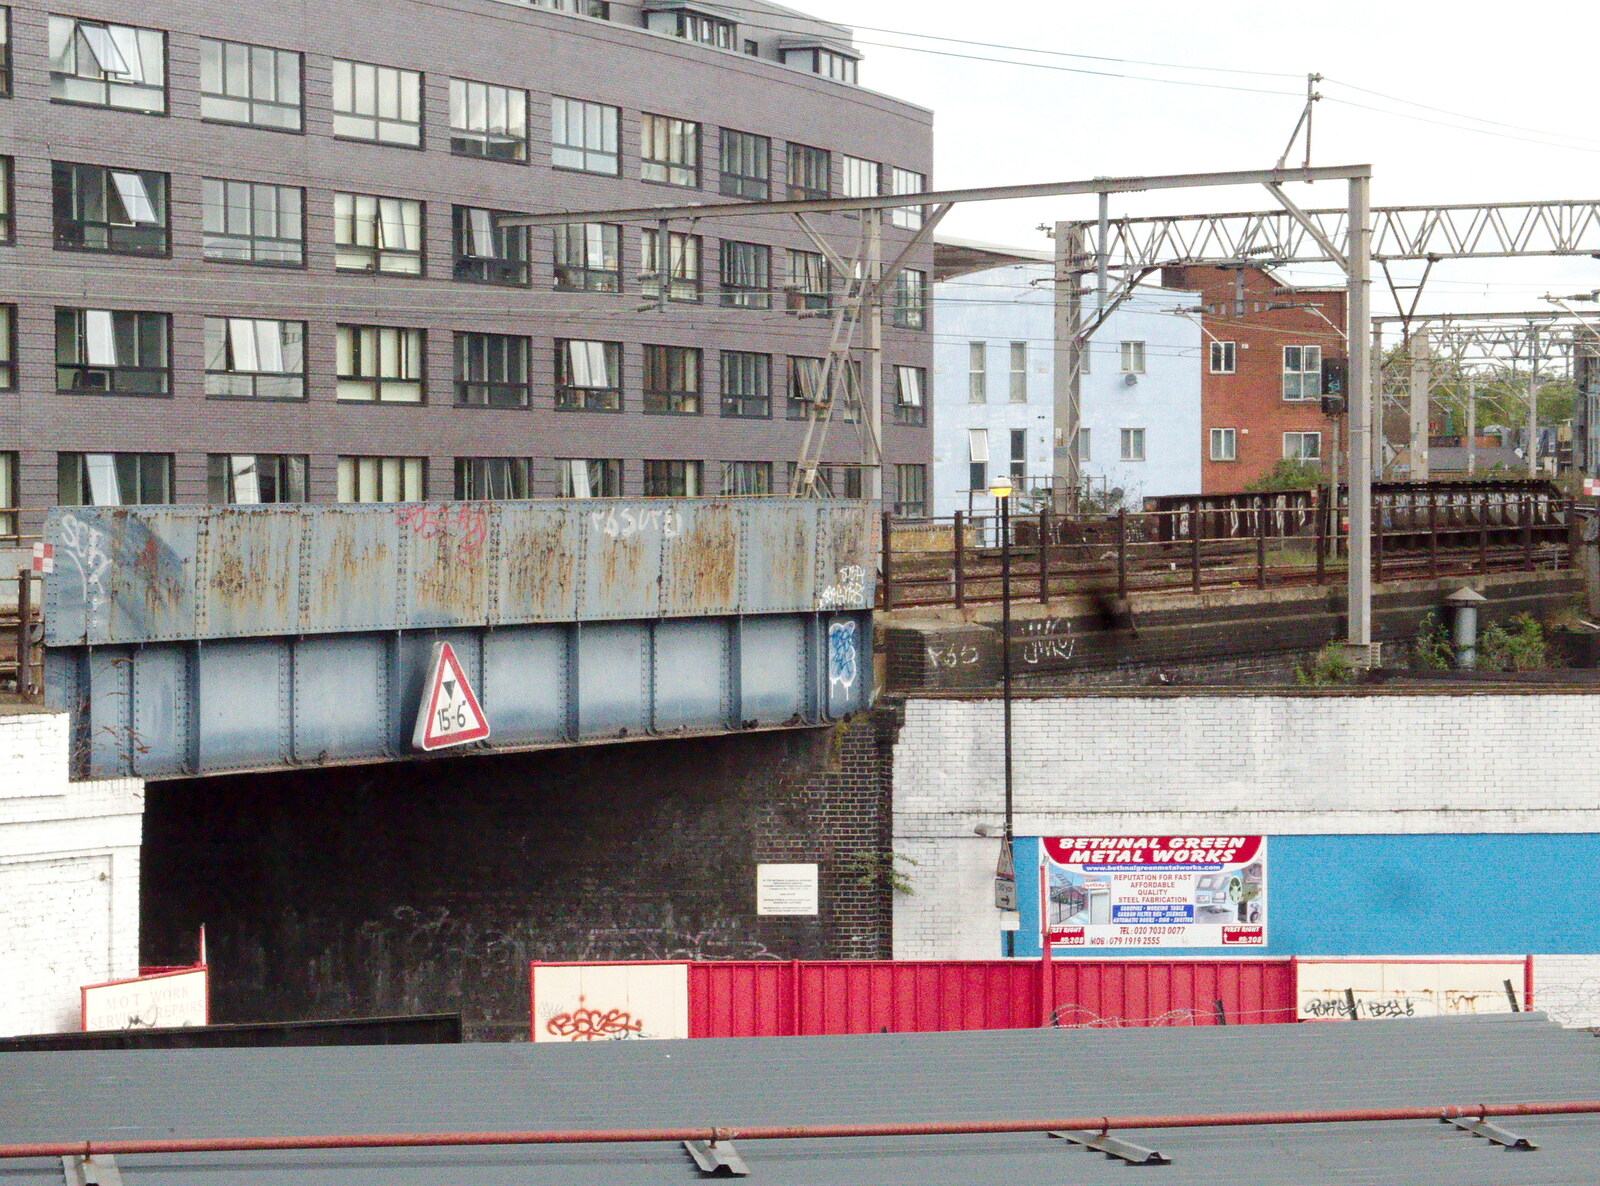 Railway bridge in Bethnal Green from A May Miscellany, London - 8th May 2014